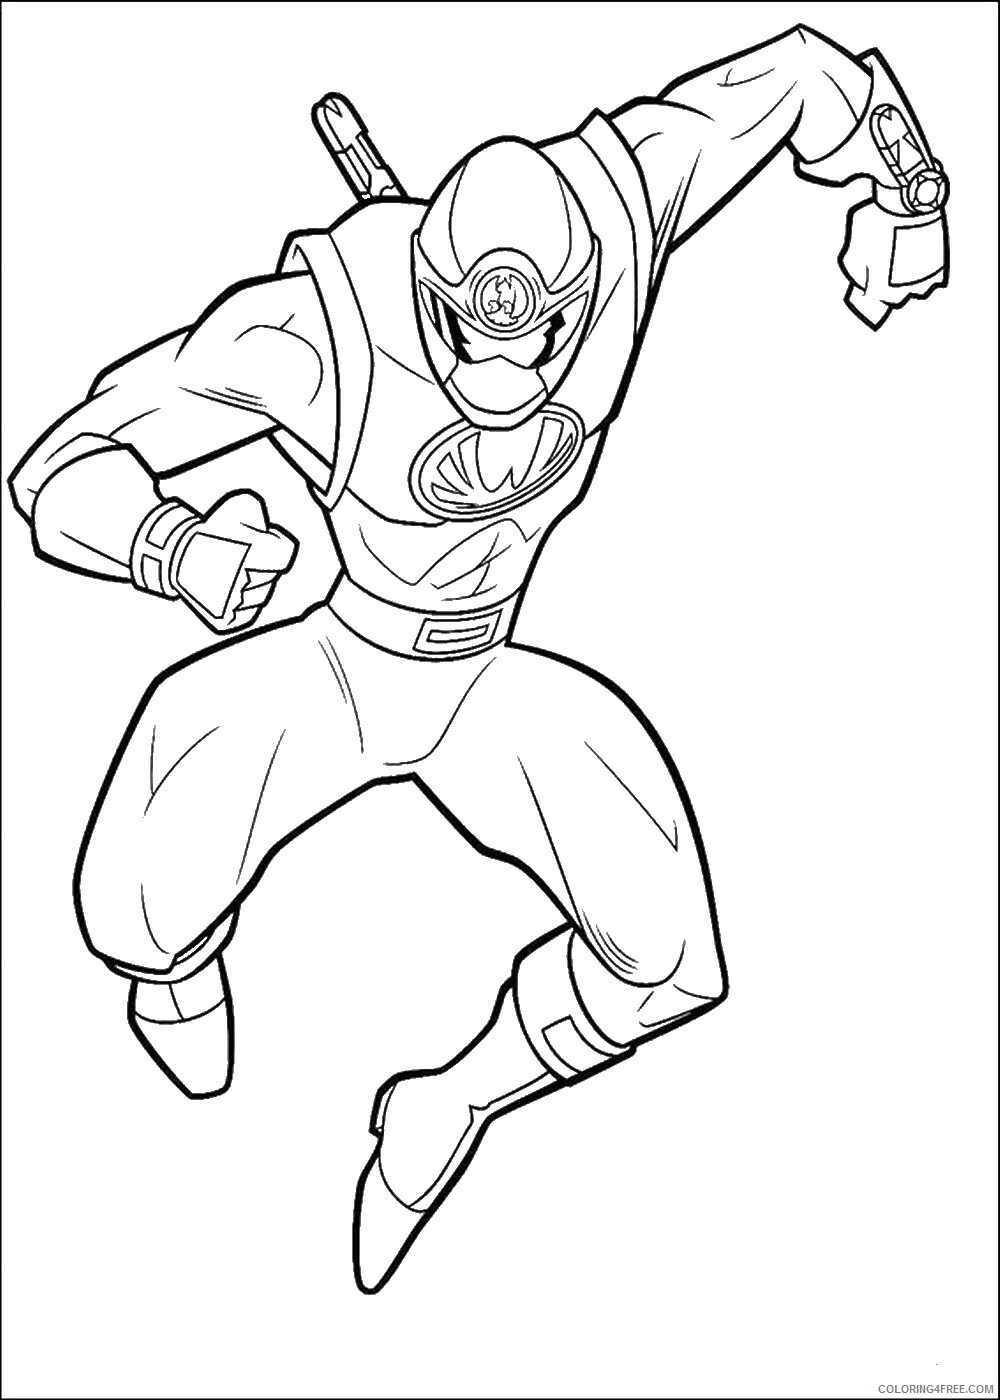 Power Rangers Coloring Pages TV Film power_rangers7 Printable 2020 06702 Coloring4free